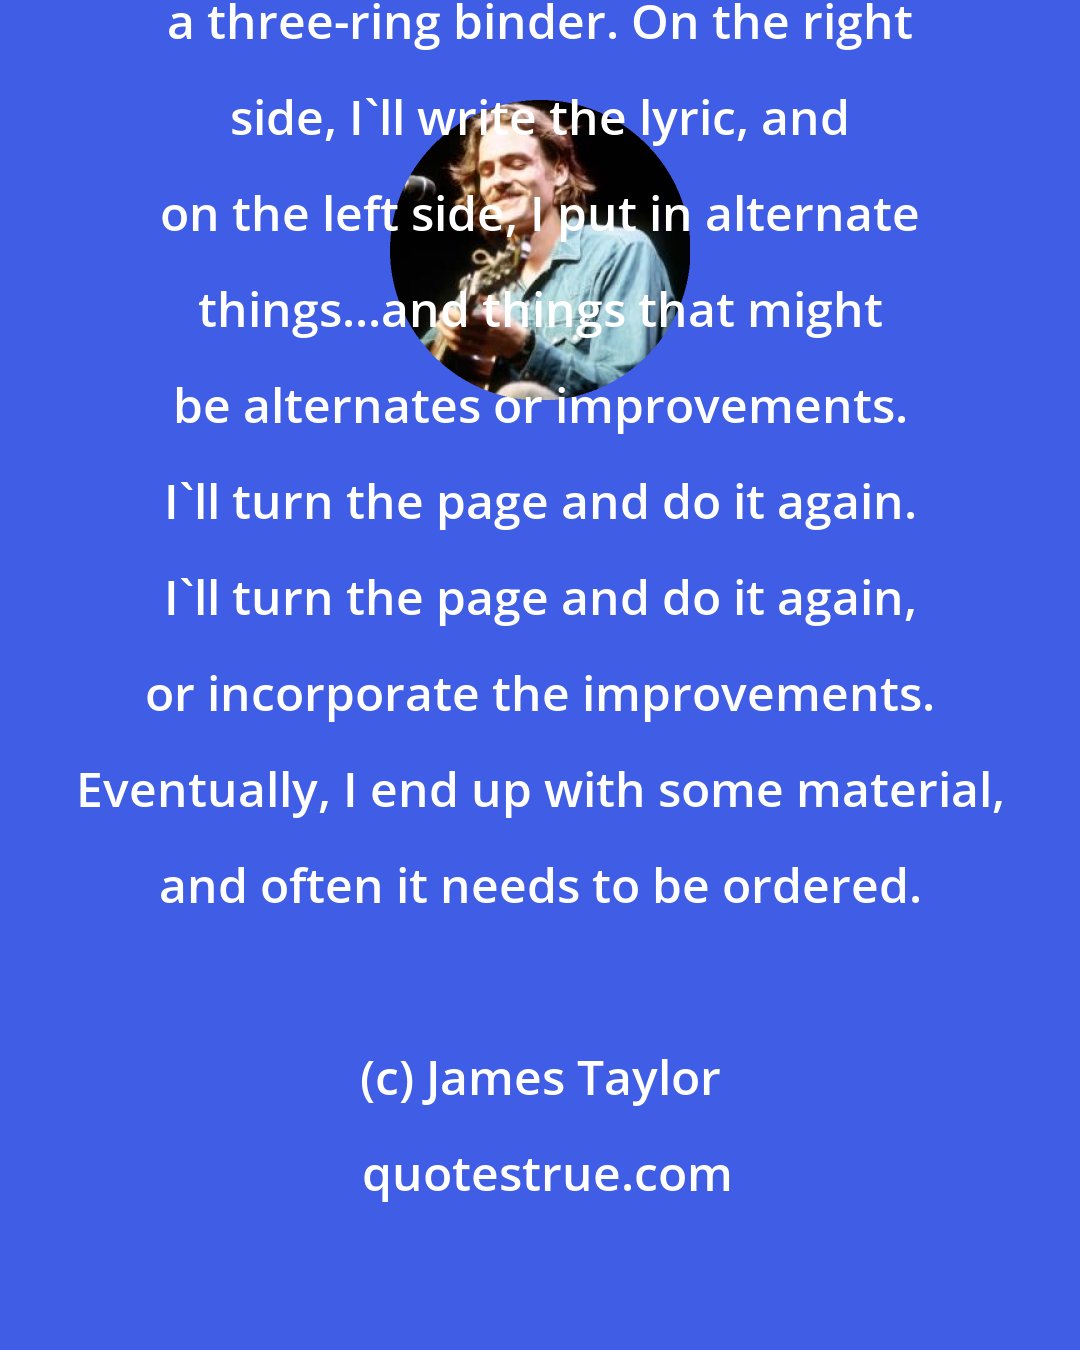 James Taylor: I typically will work on a lyric in a three-ring binder. On the right side, I'll write the lyric, and on the left side, I put in alternate things...and things that might be alternates or improvements. I'll turn the page and do it again. I'll turn the page and do it again, or incorporate the improvements. Eventually, I end up with some material, and often it needs to be ordered.